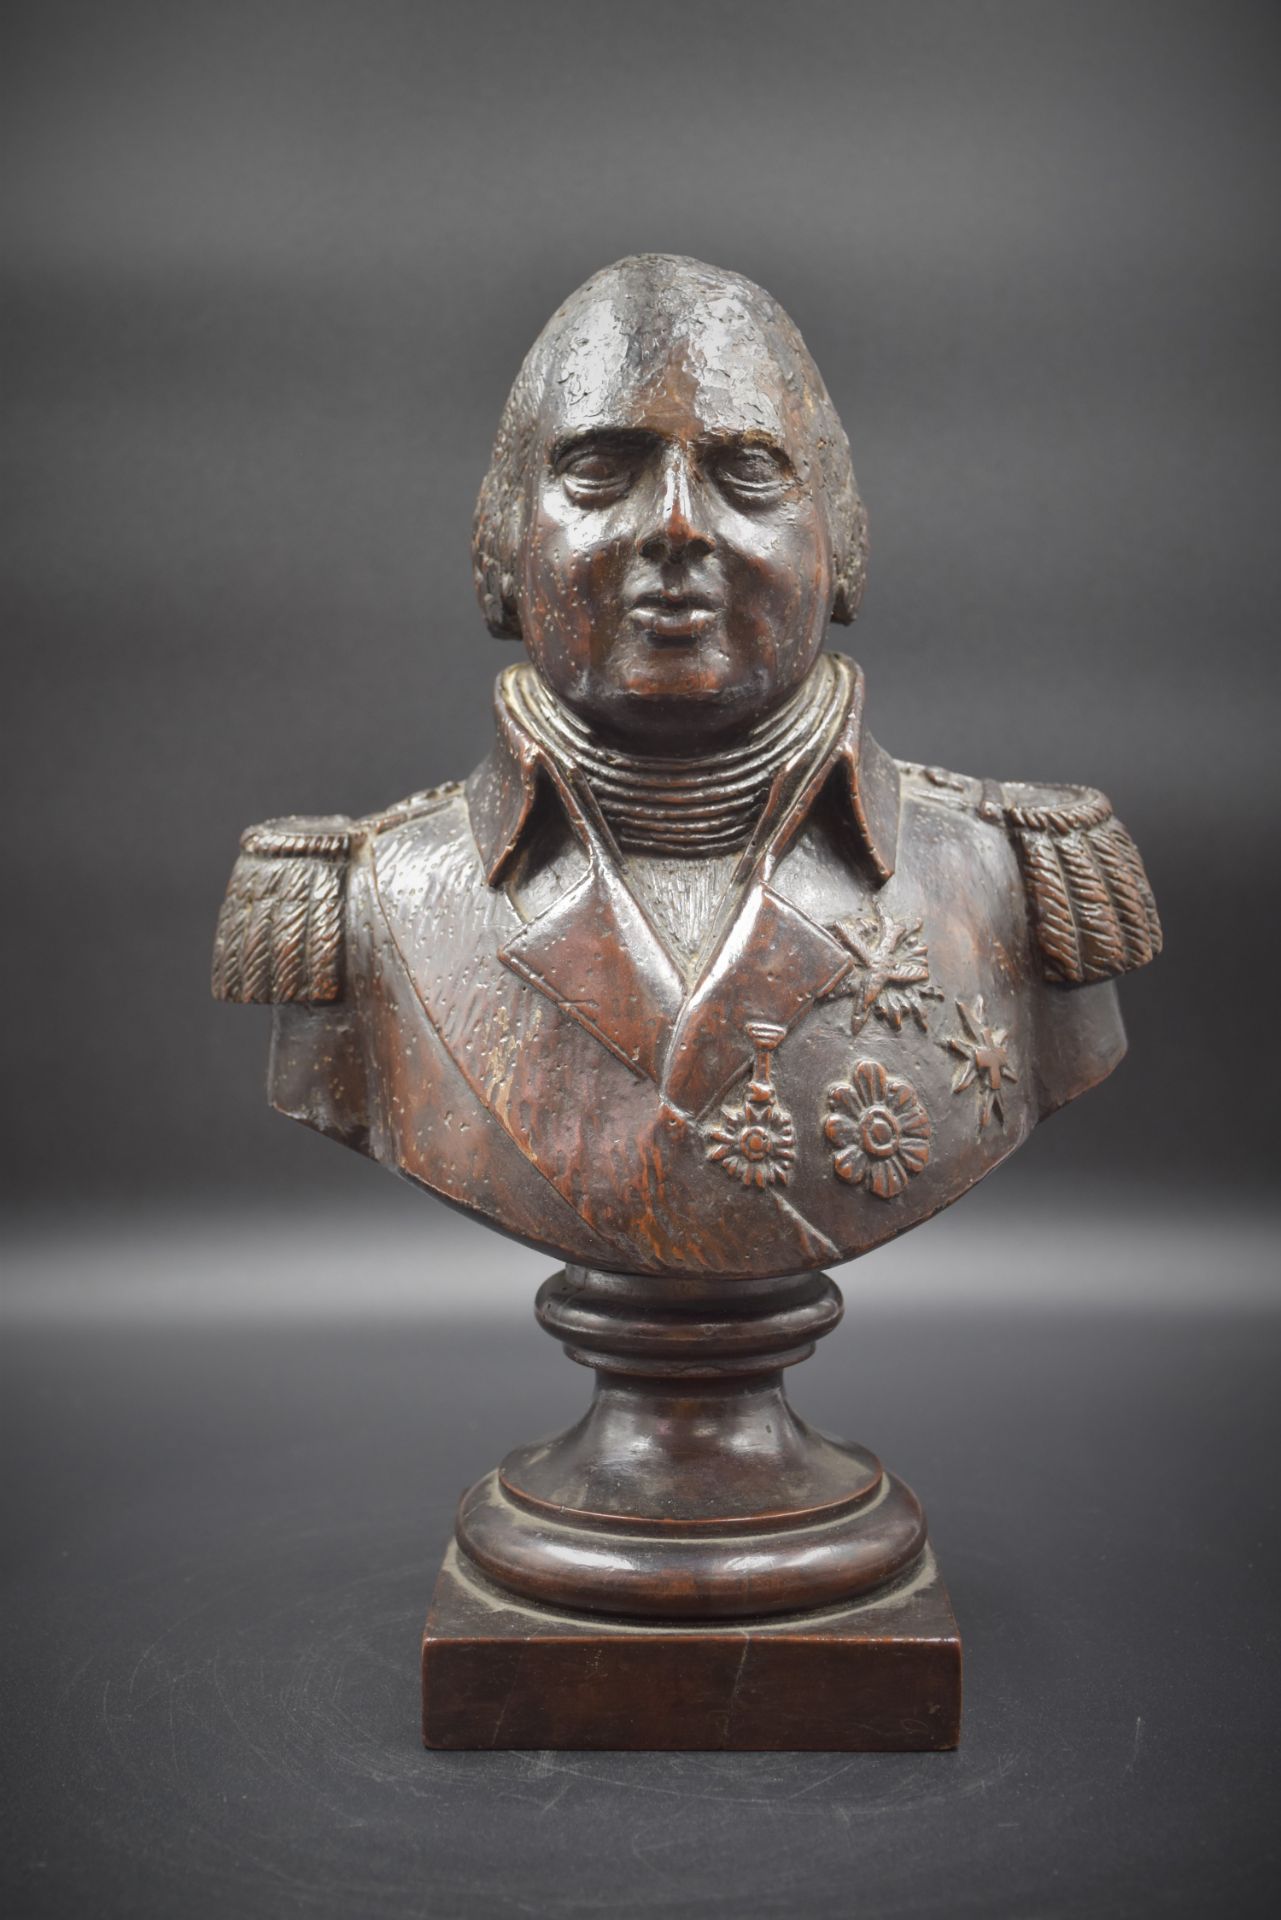 Carved wooden bust representing Louis XVIII adorned with his medals. Crowned epaulets. Wear and tear